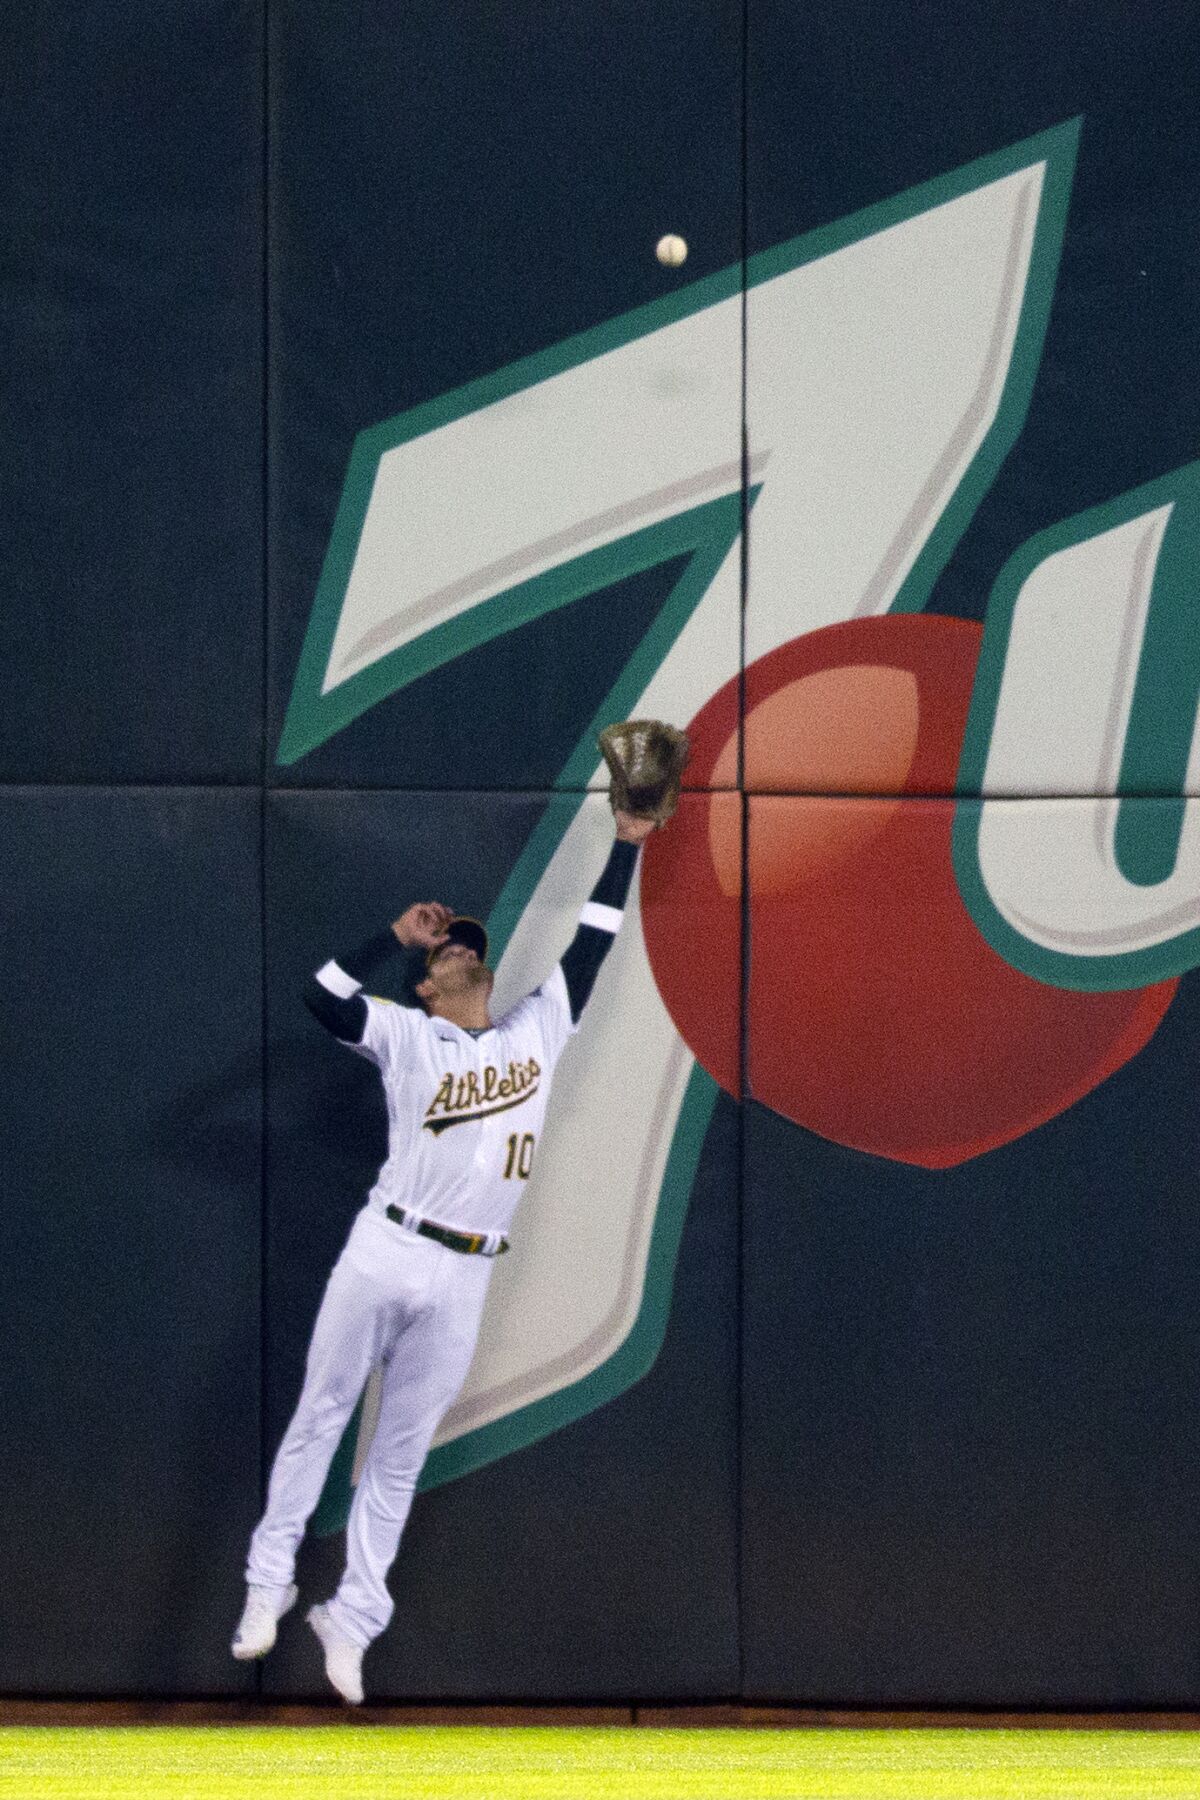 Oakland Athletics left fielder Chad Pinder makes a leaping catch at the wall on a ball hit by Kansas City Royals' Bobby Witt Jr. during the sixth inning of a baseball game Friday, June 17, 2022, in Oakland, Calif. (AP Photo/D. Ross Cameron)